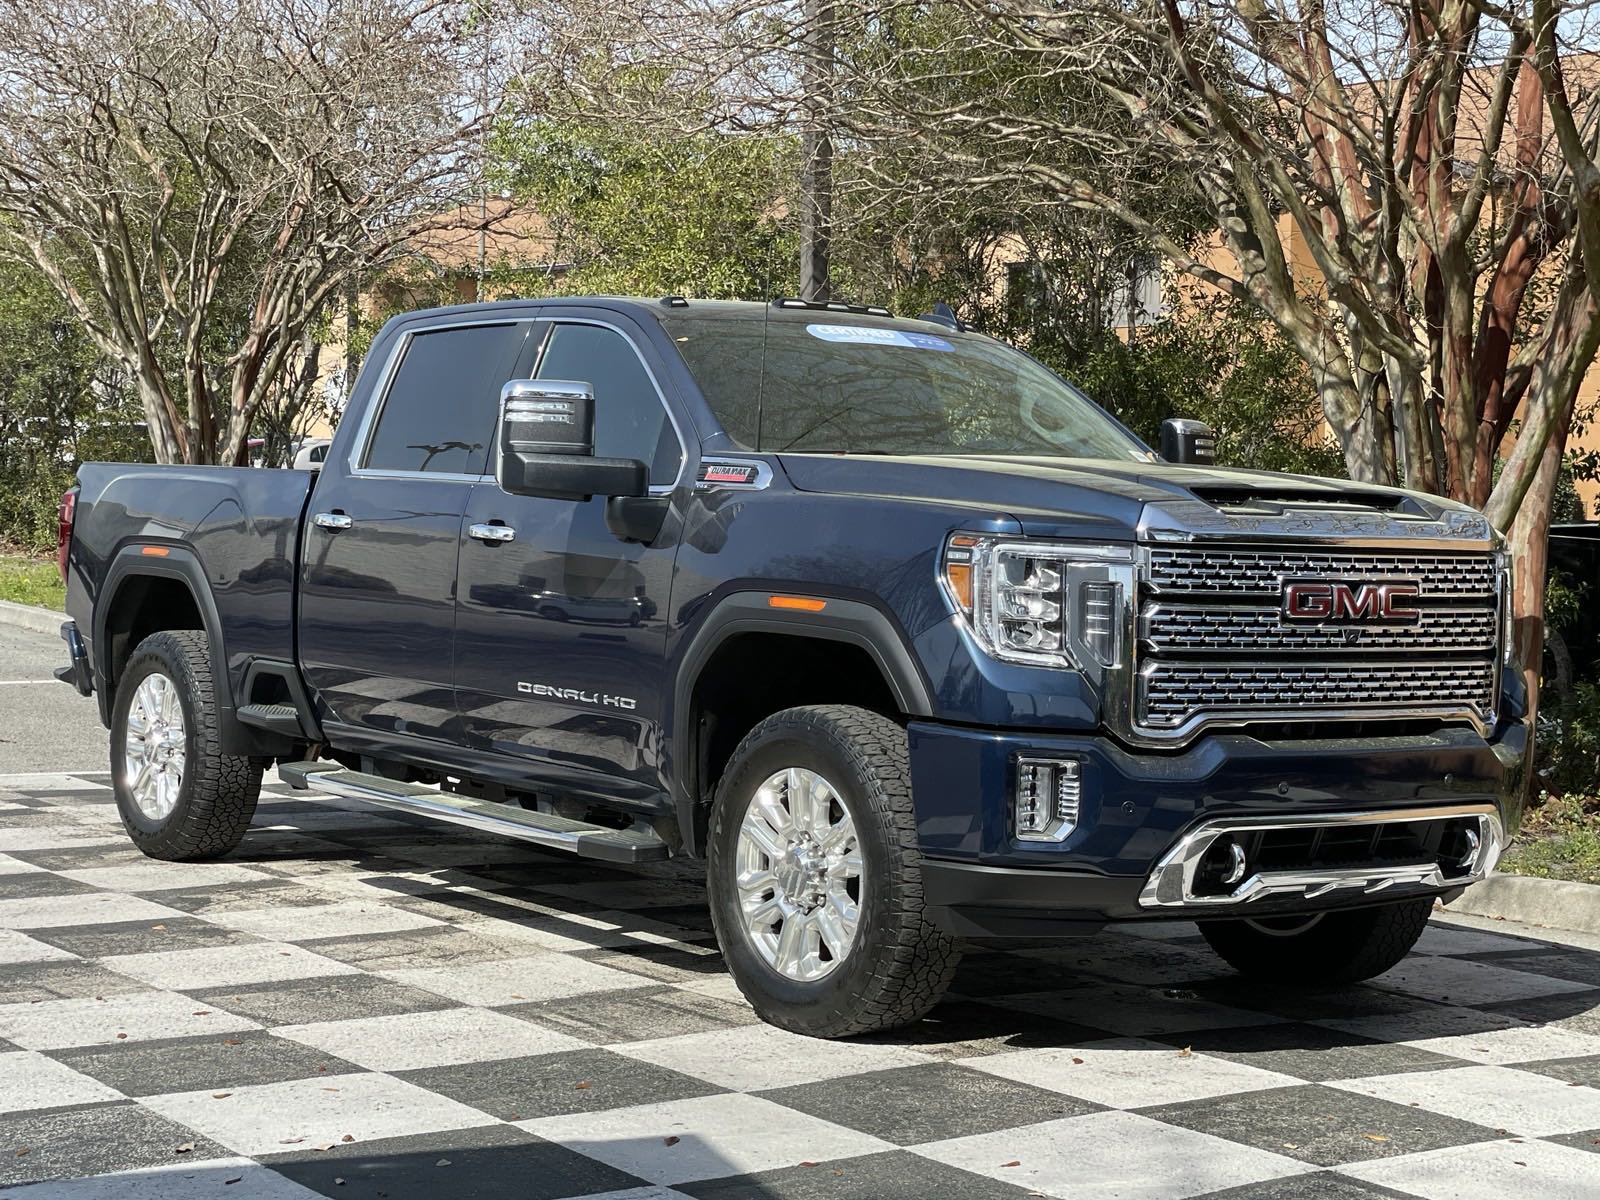 Certified Pre-Owned 2023 GMC Sierra 2500 HD Denali Crew Cab in Cary #X9133  | Hendrick Buick GMC Cary